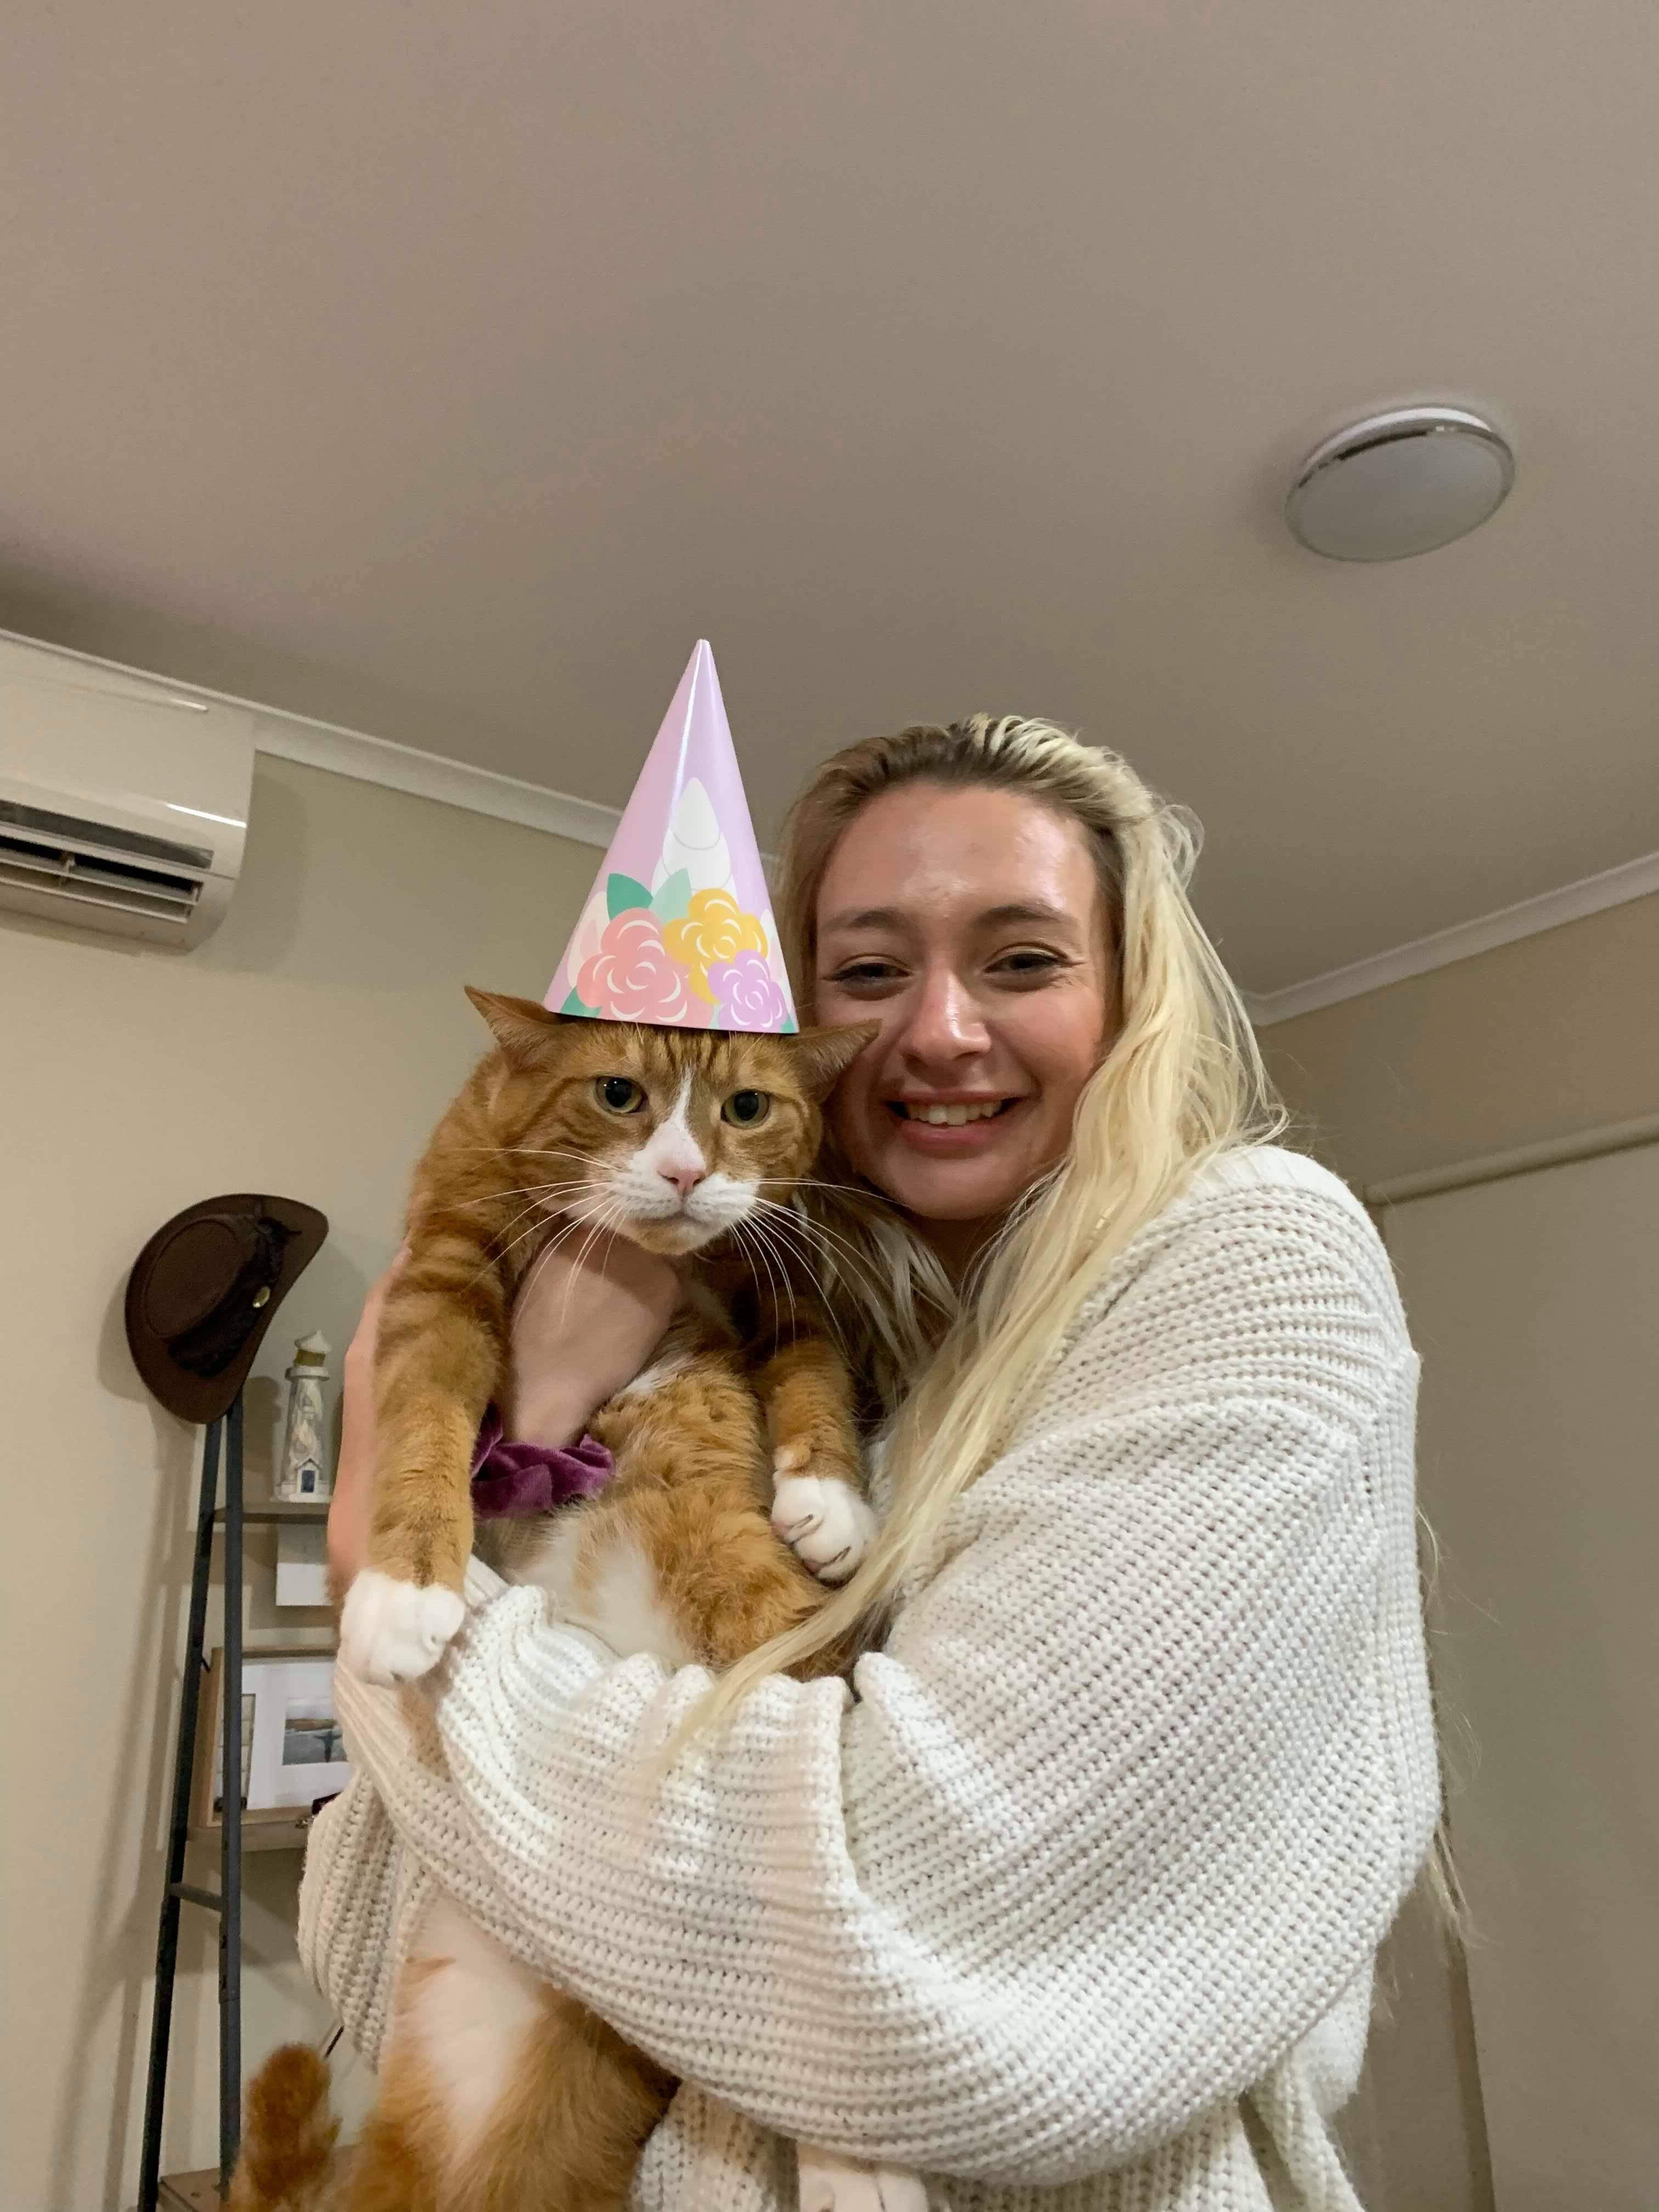 I gave my cat a birthday party. He was not impressed